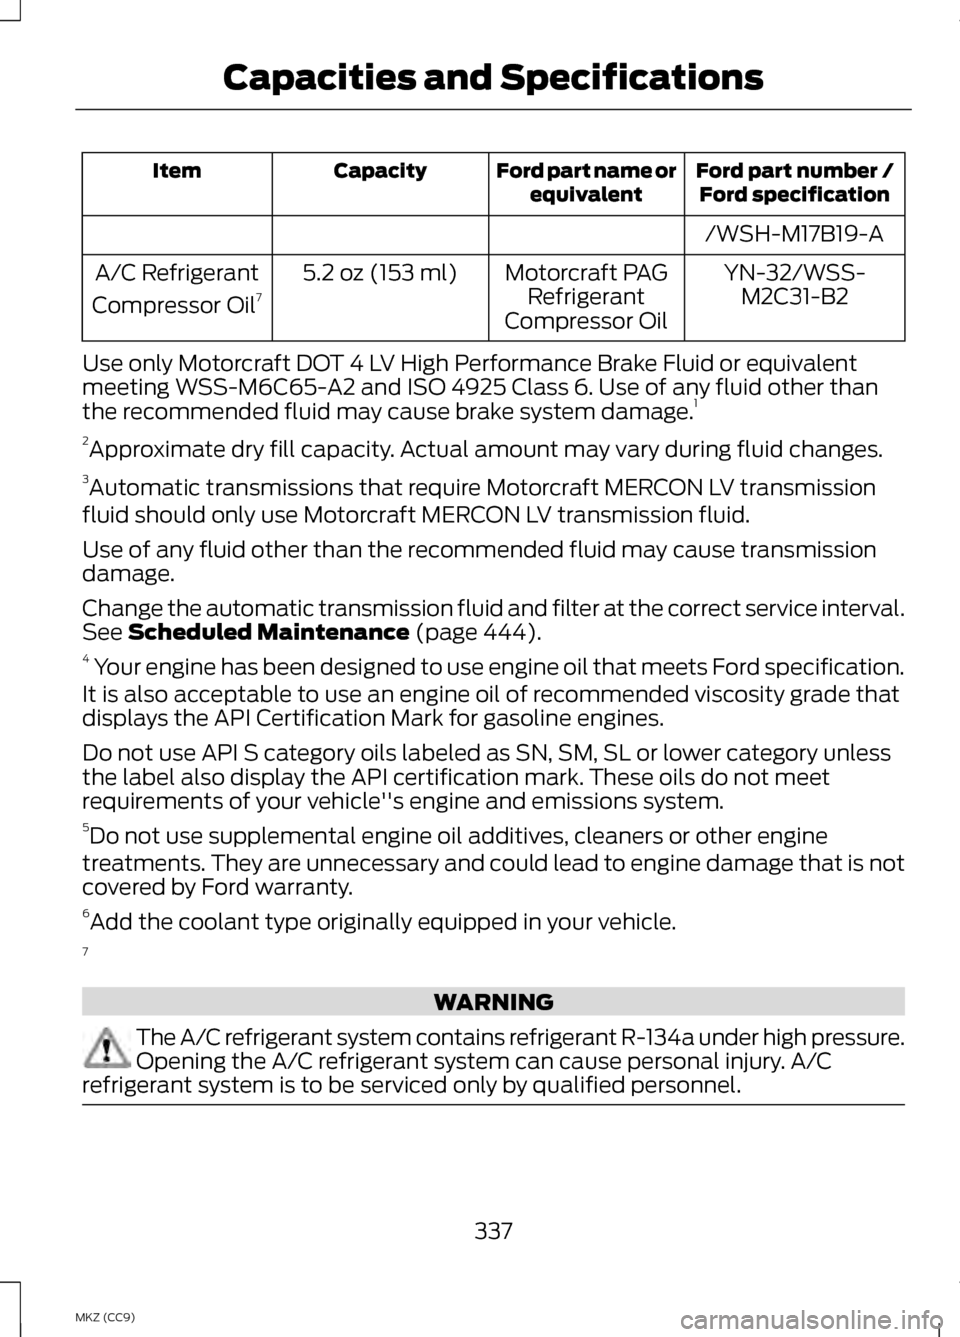 LINCOLN MKZ HYBRID 2013  Owners Manual Ford part number /
Ford specification
Ford part name or
equivalent
Capacity
Item
/WSH-M17B19-AYN-32/WSS-M2C31-B2
Motorcraft PAG
Refrigerant
Compressor Oil
5.2 oz (153 ml)
A/C Refrigerant
Compressor Oi